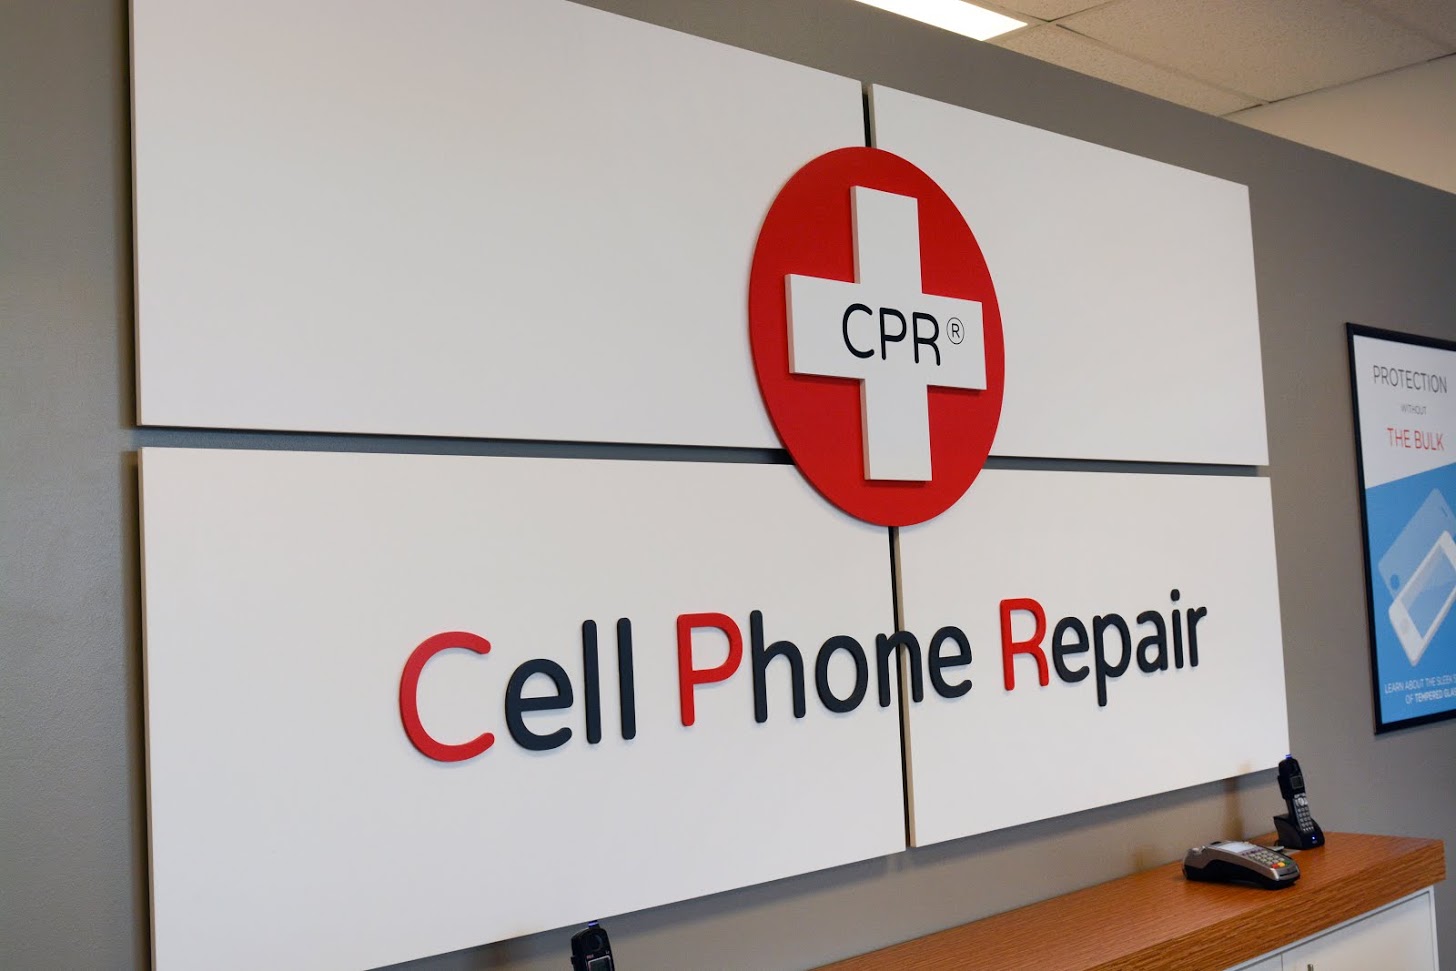 CPR Cell Phone Repair, Tuesday, April 23, 2019, Press release picture